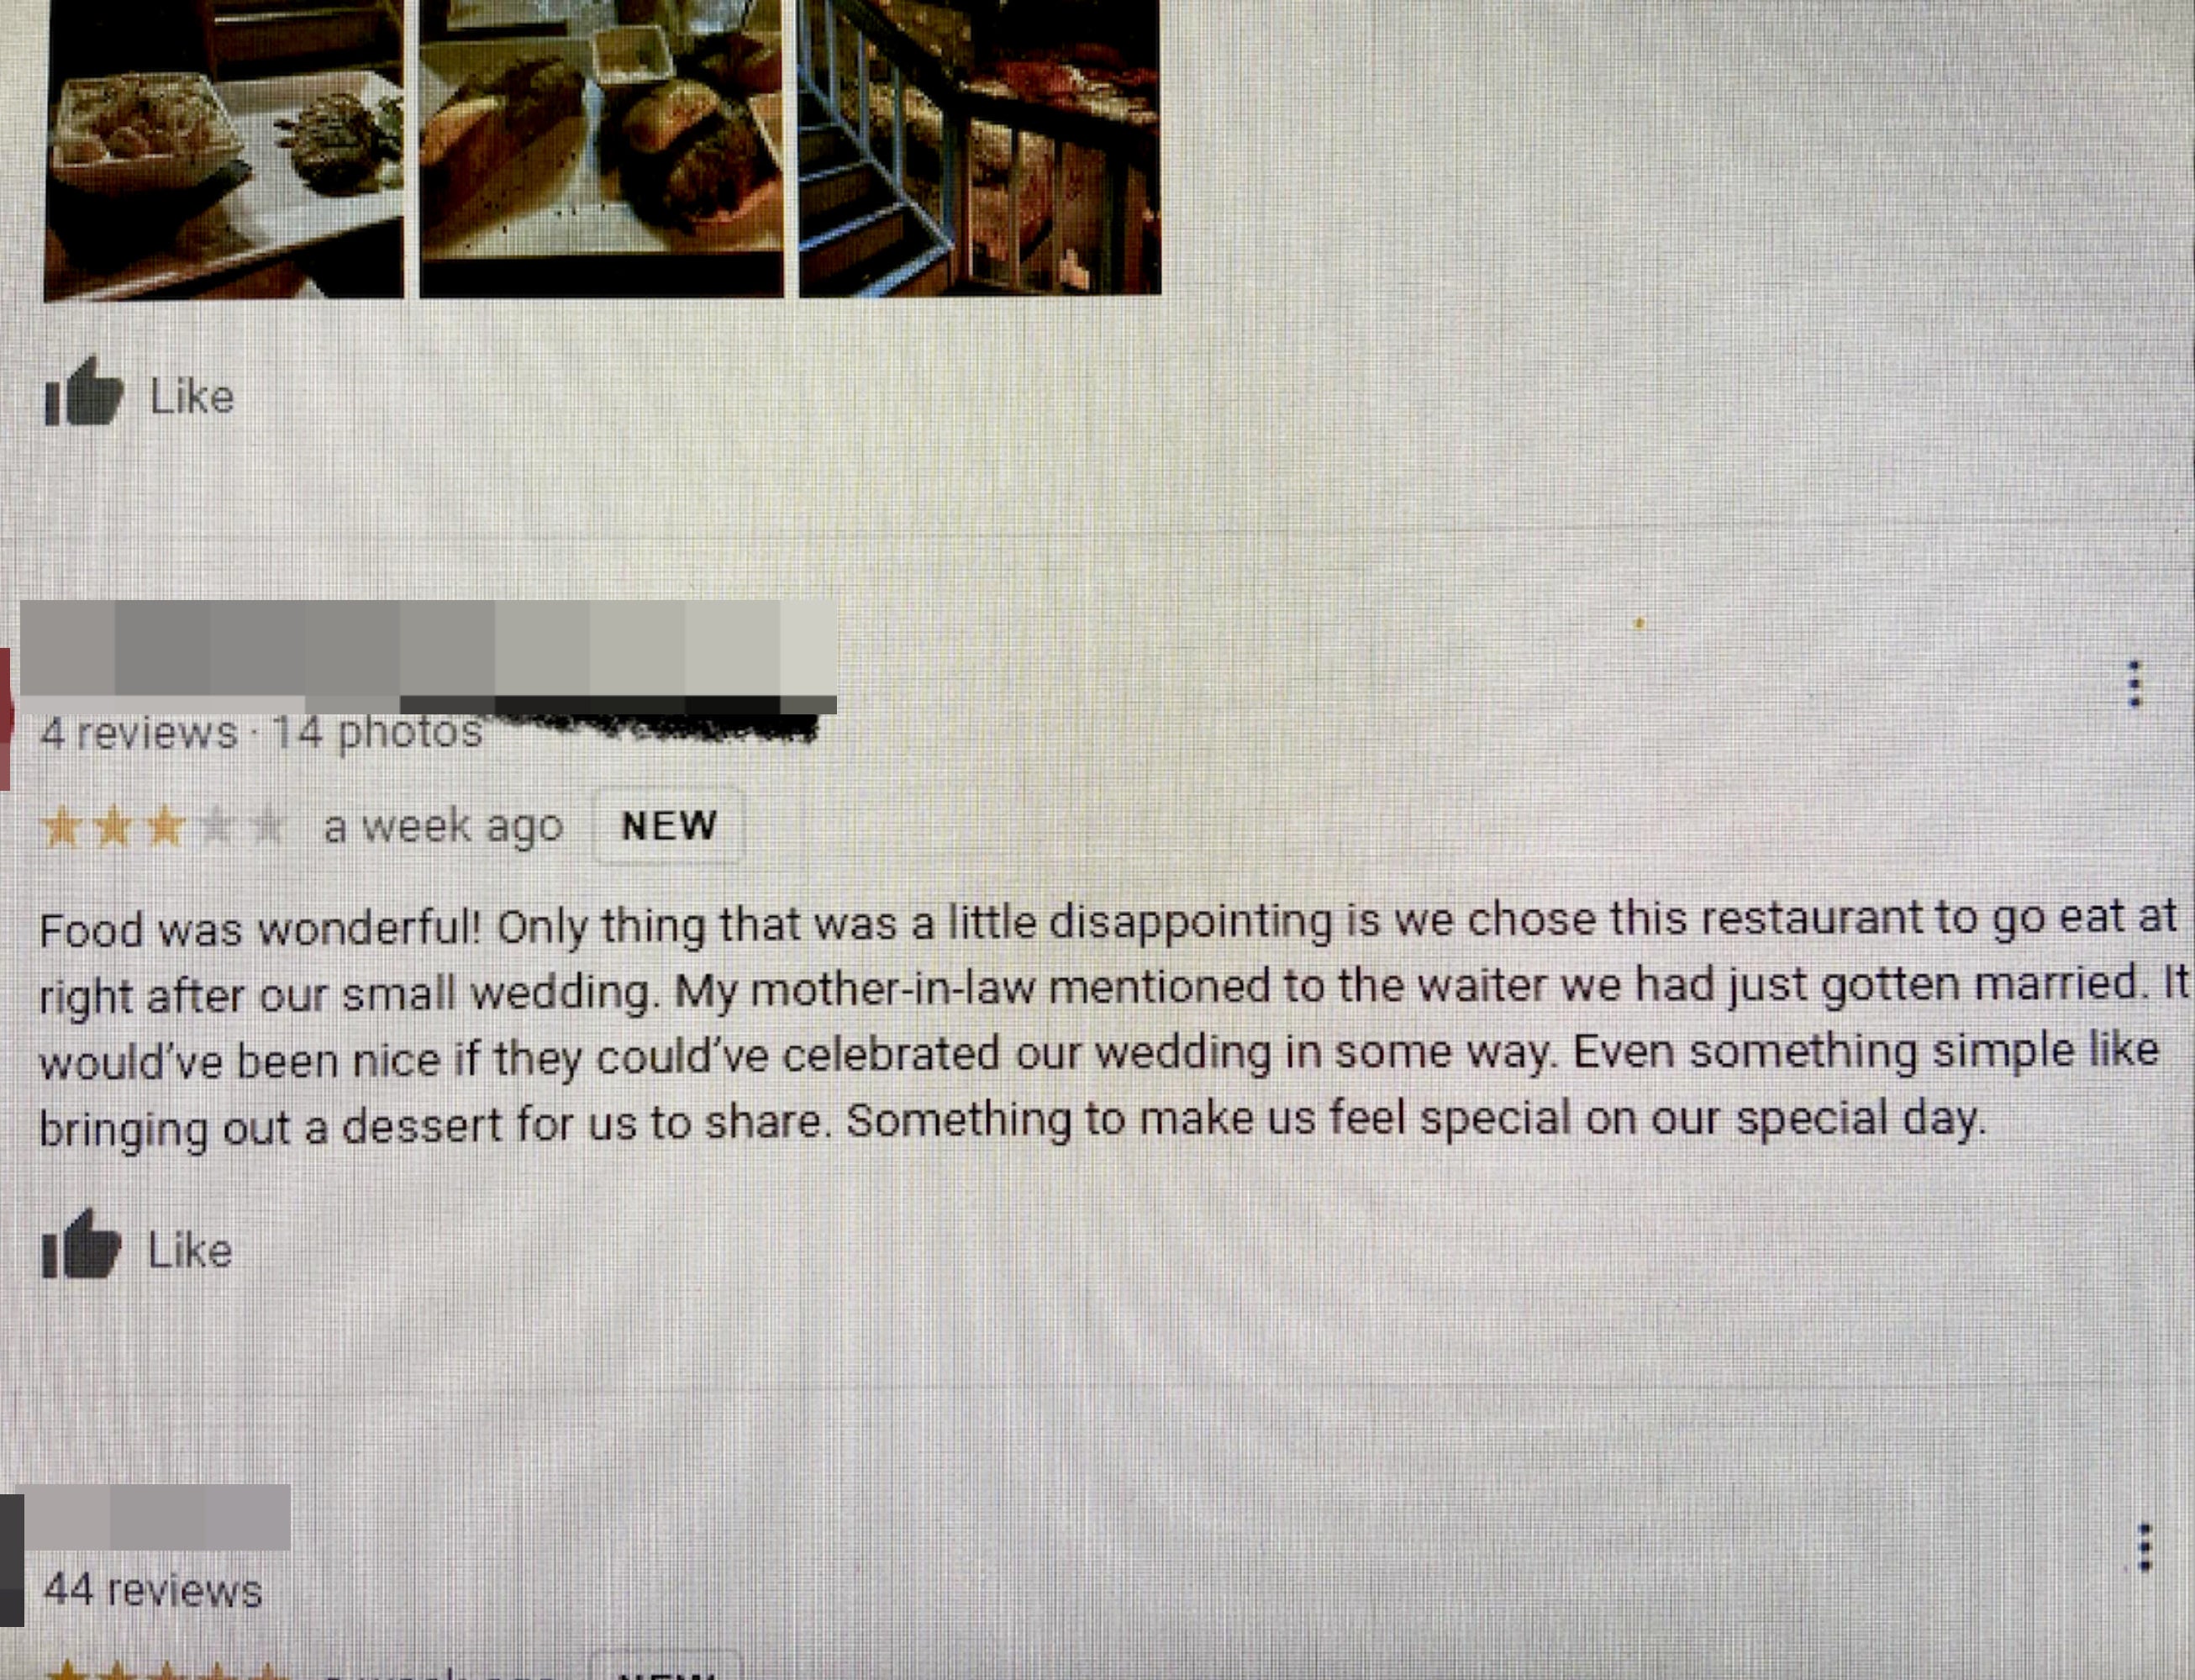 The review says they went to the restaurant right after their wedding and were disappointed the waiter didn&#x27;t offer anything for free to celebrate their special day